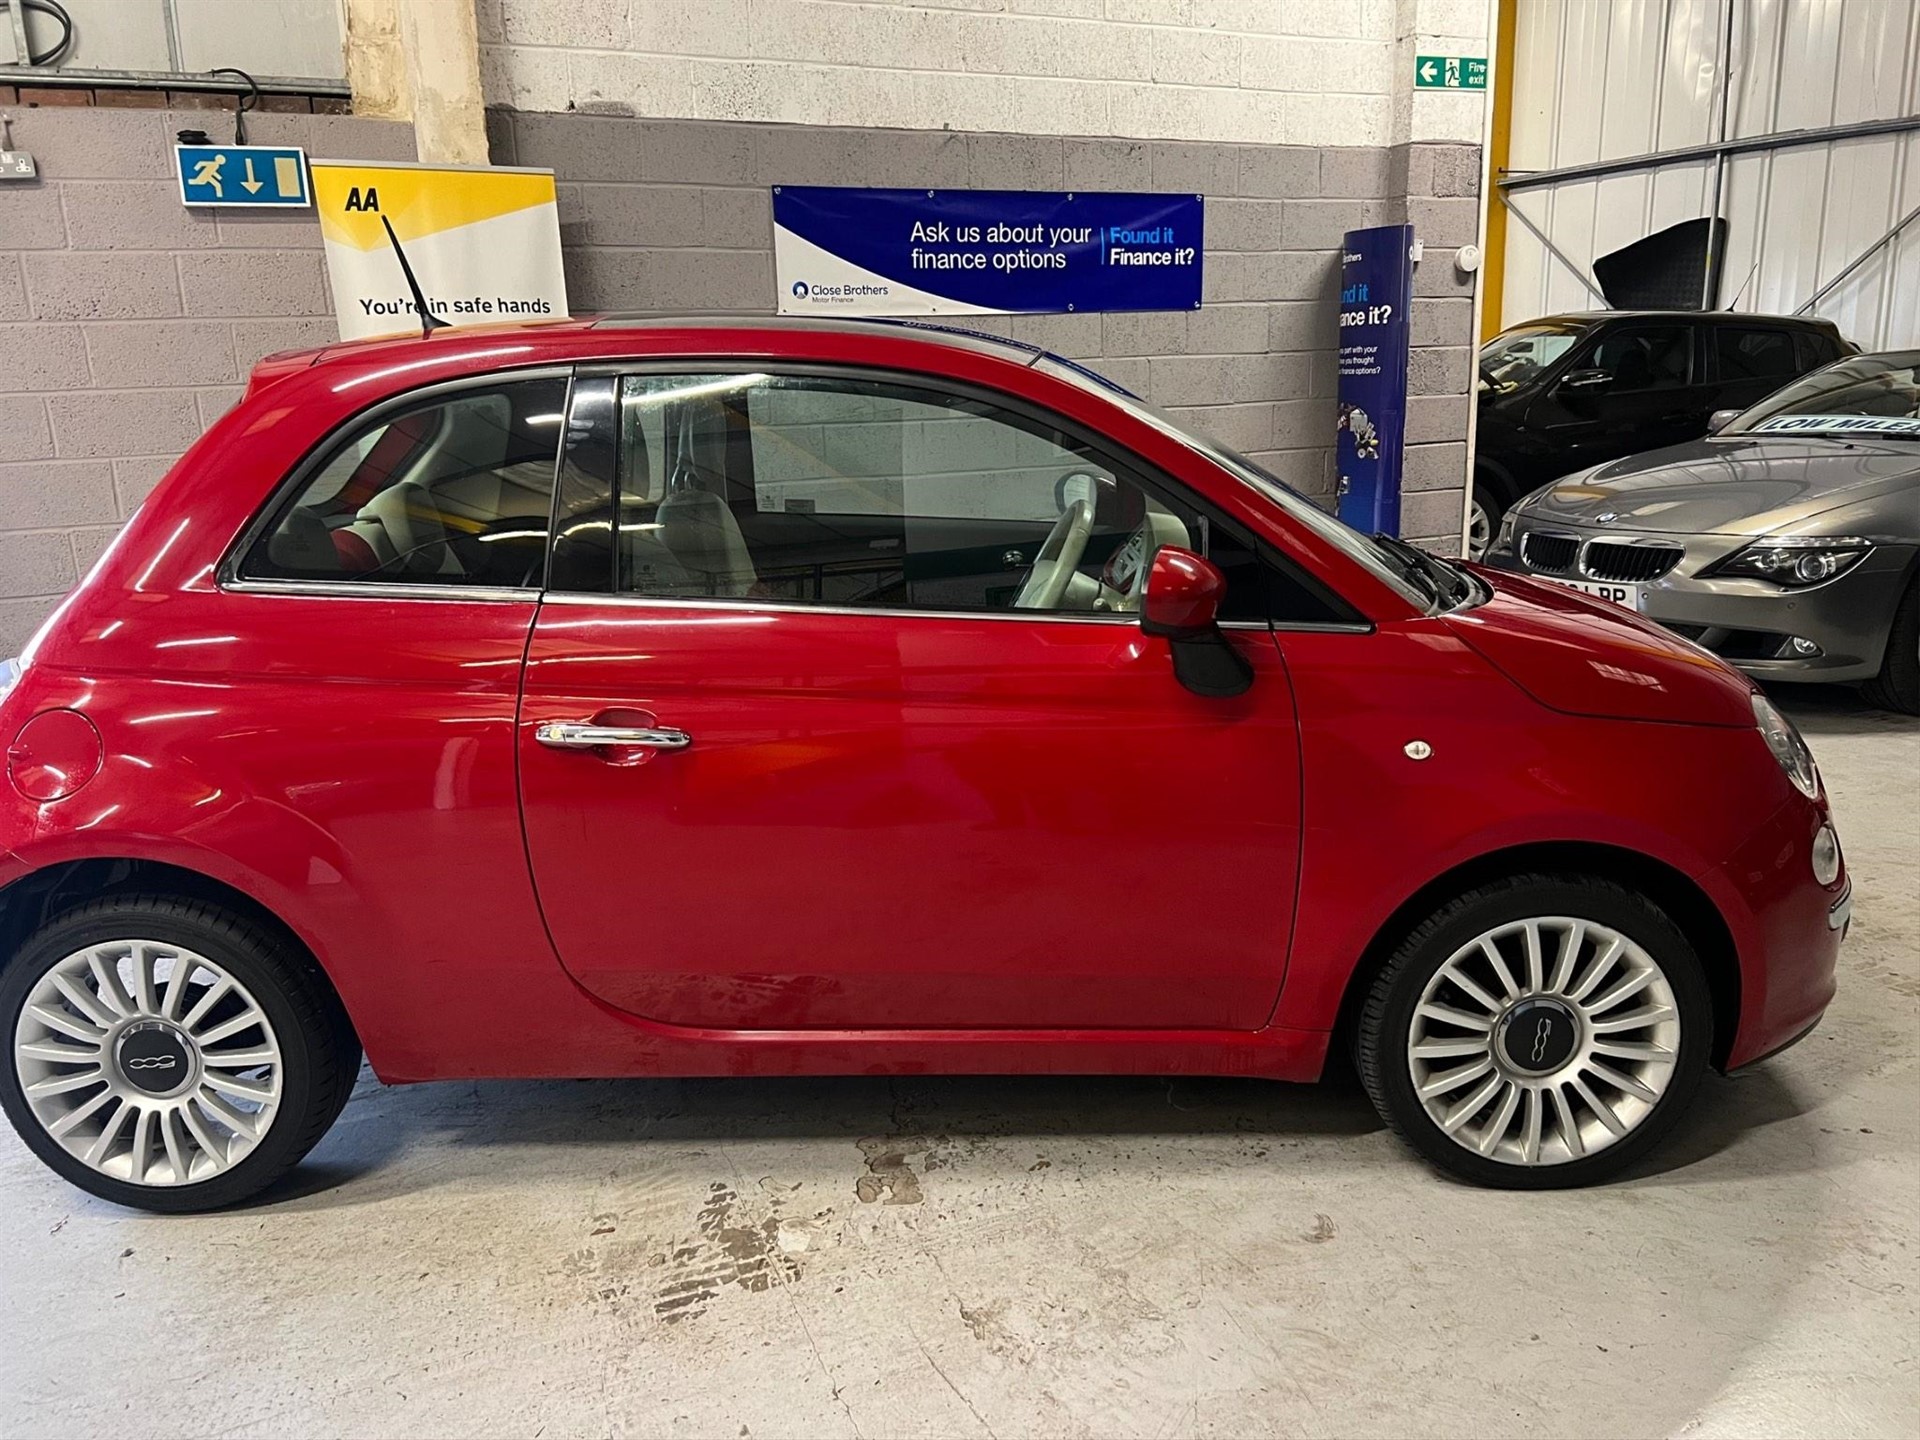 Used Fiat 500 for sale in Caldicot, Monmouthshire